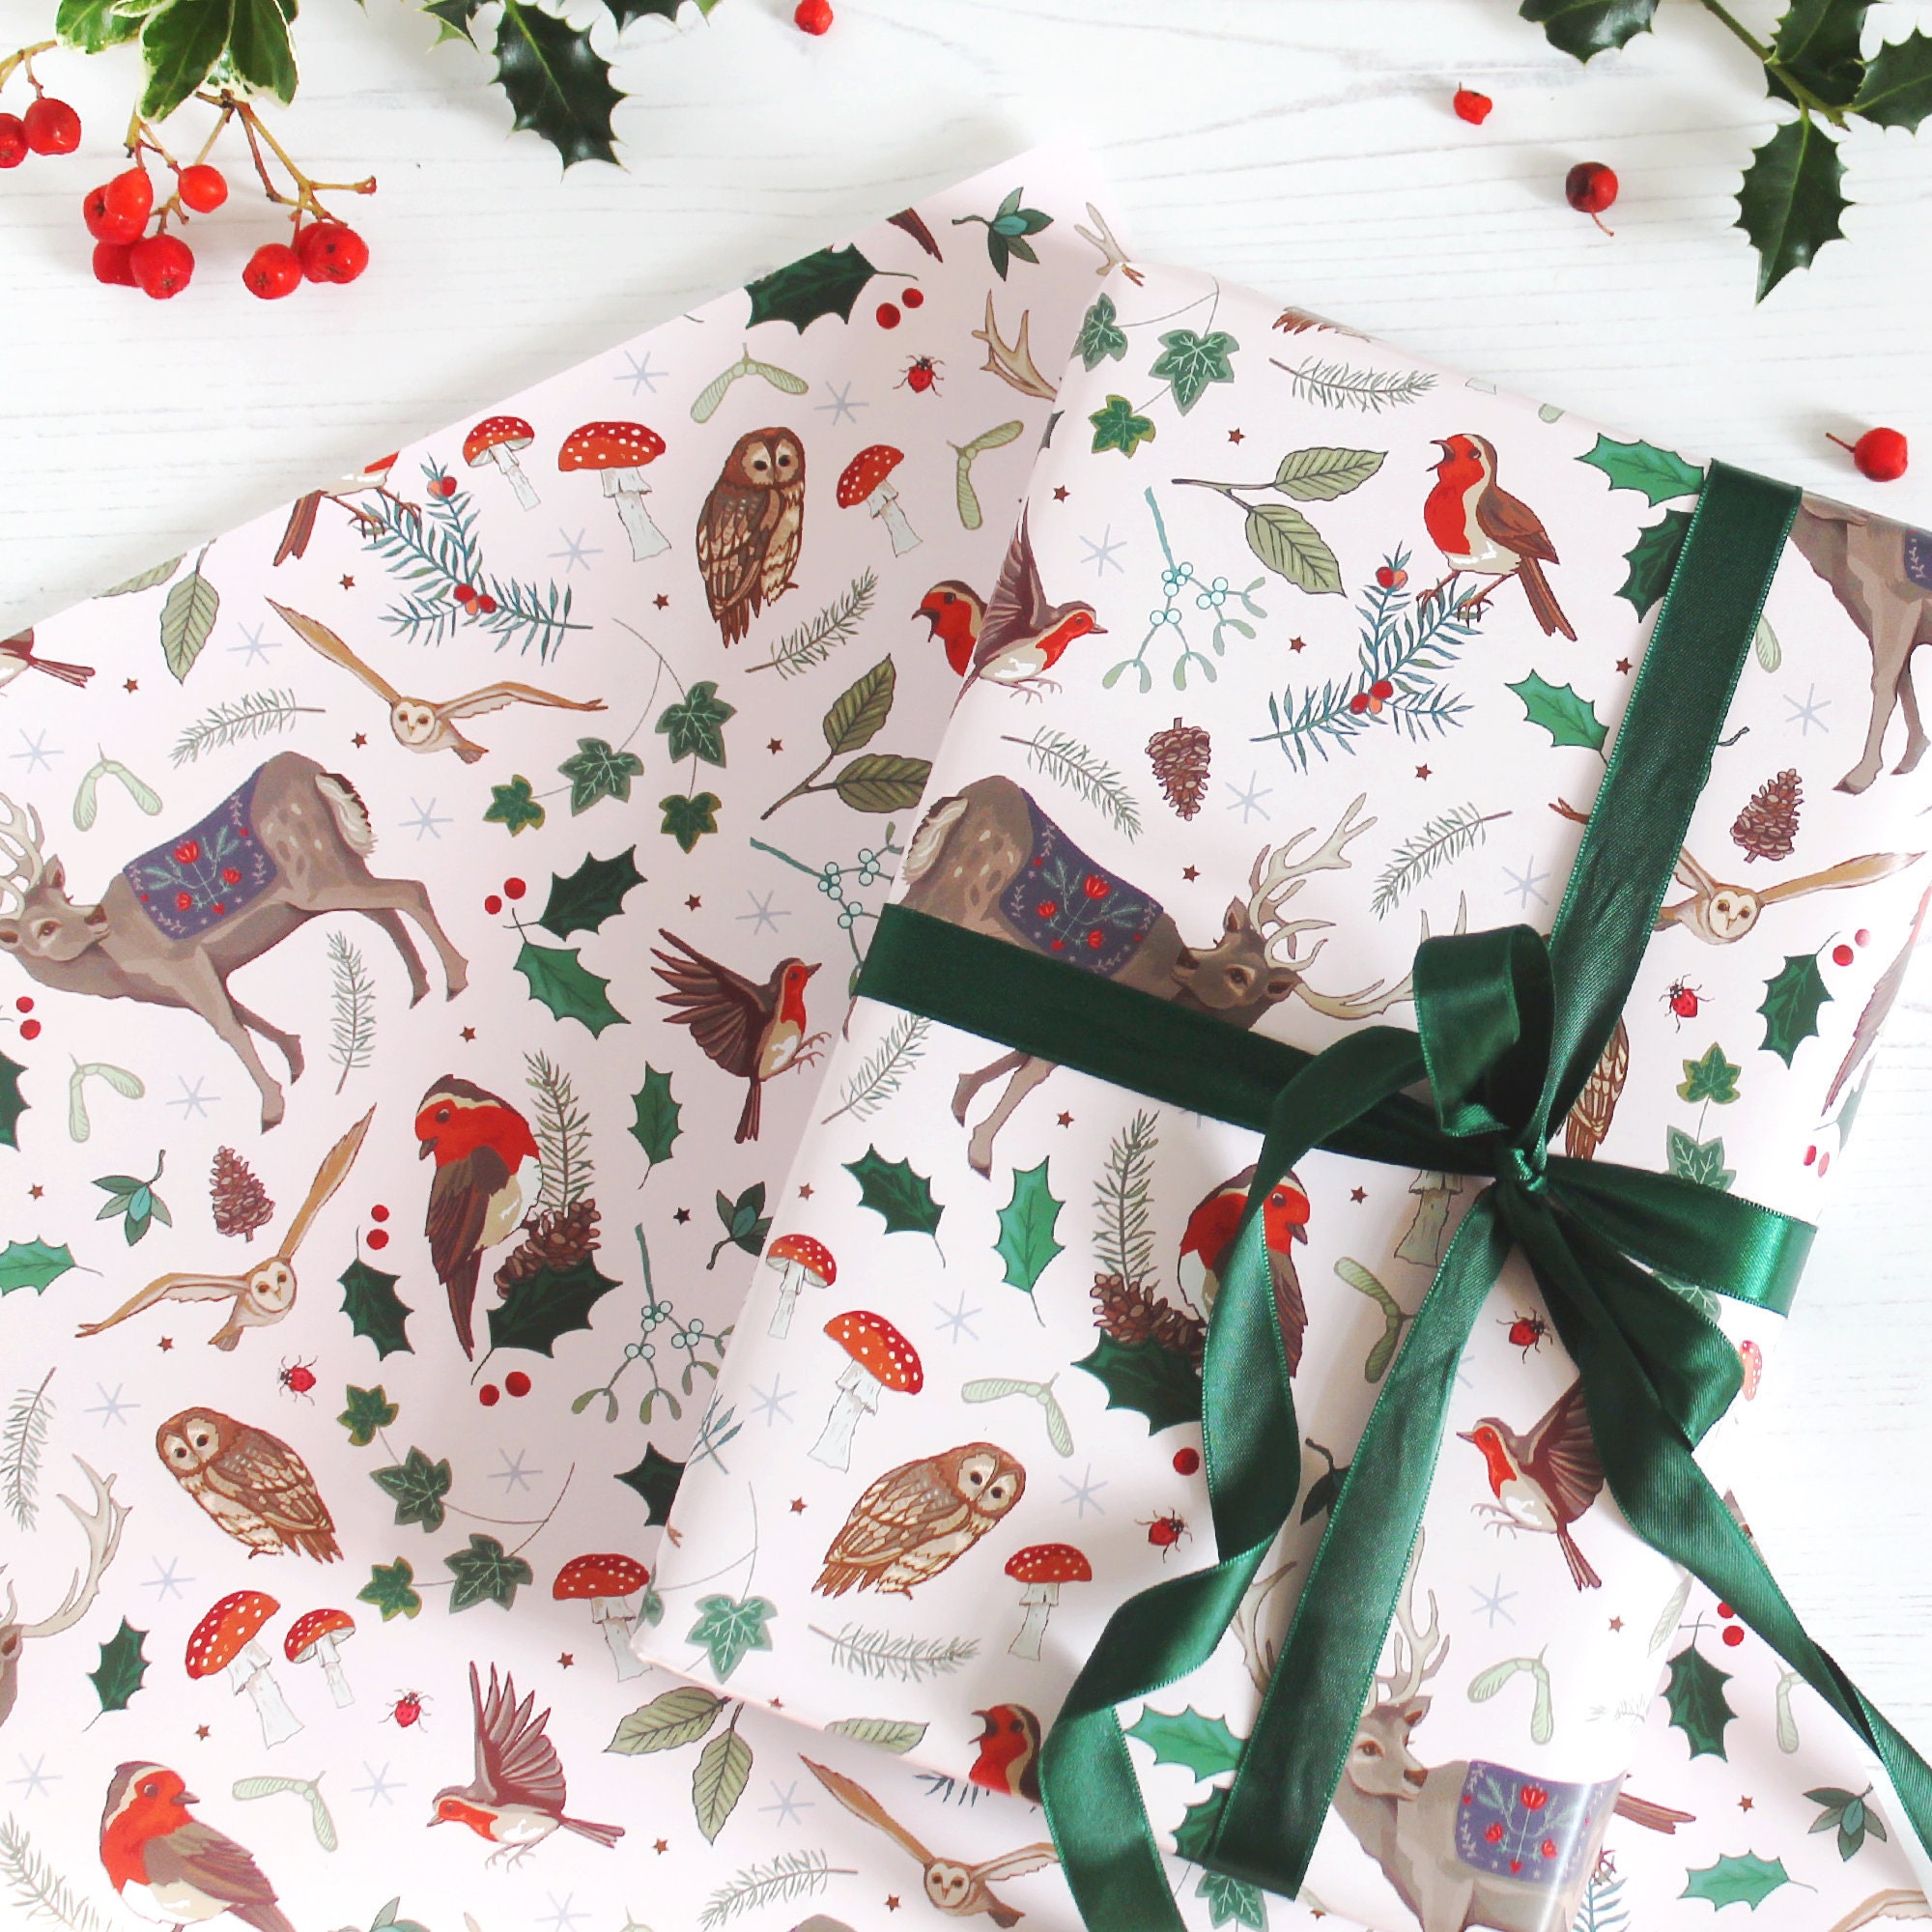 Owl gift wrapping paper, Woodland quality gift wrap sheet + tag, Recyclable